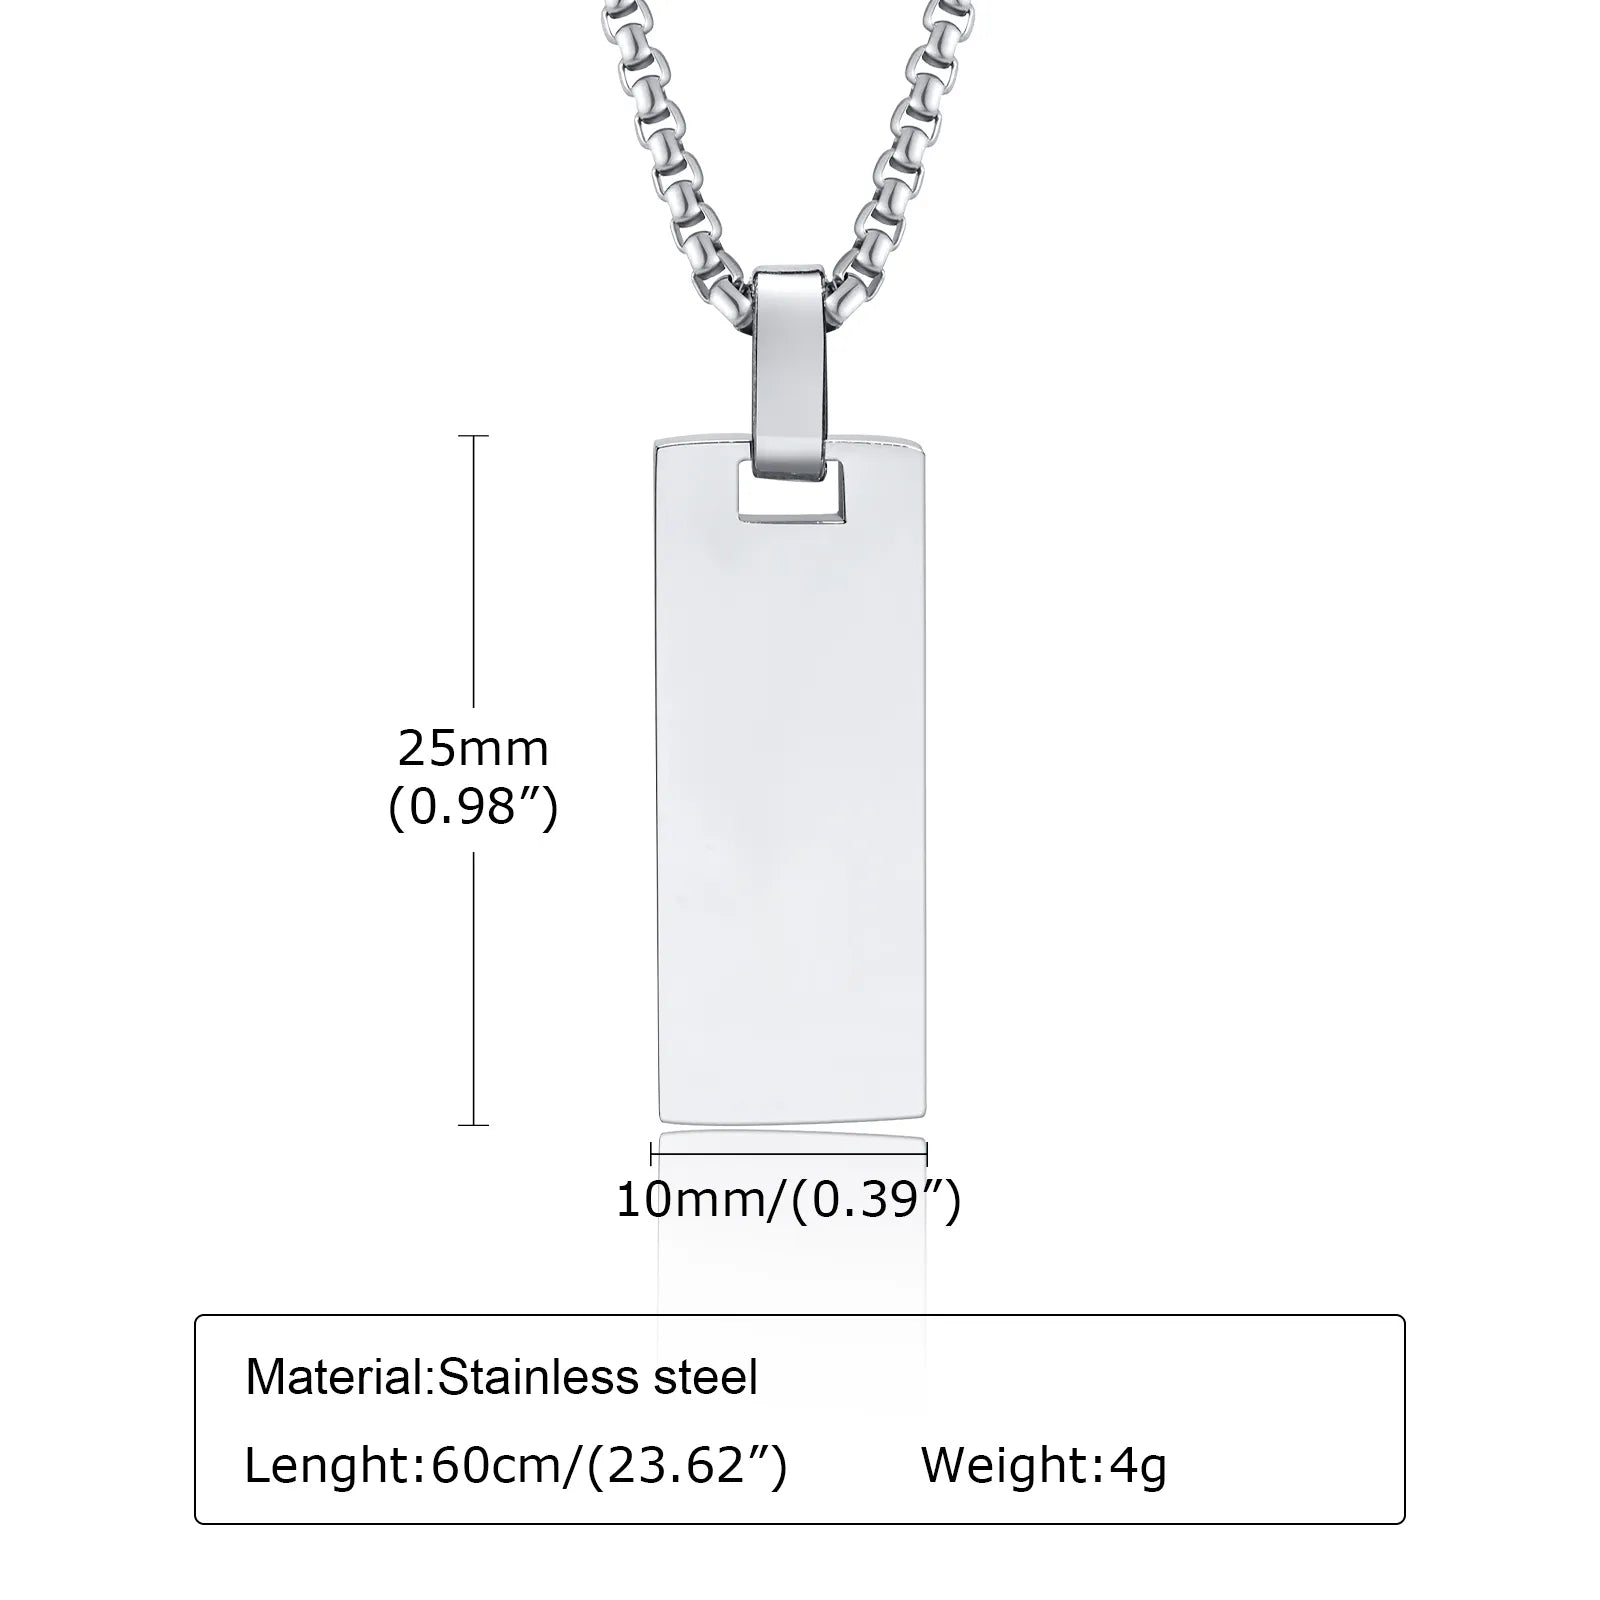 Men's Initial Vertical Bar Necklaces, Waterproof Stainless Steel Plain Geometric Pendant Collar, Personalize Custom Gifts Jewelry